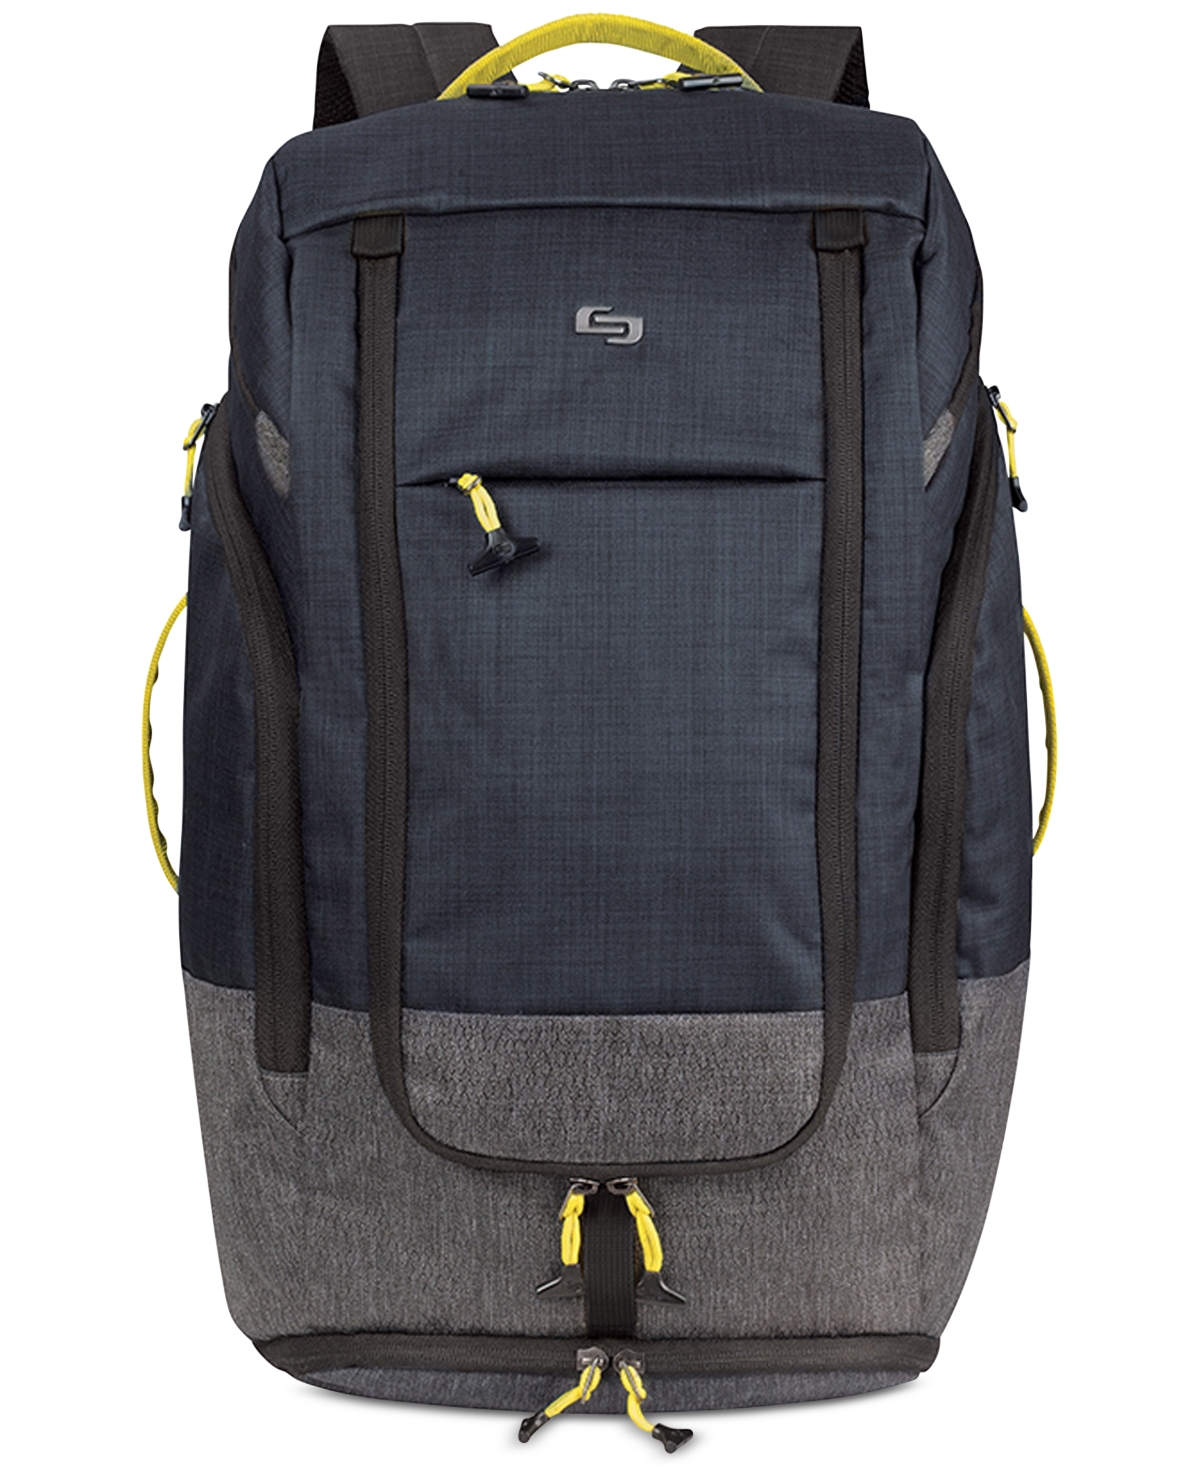 New York Everyday Max Backpack - Gray